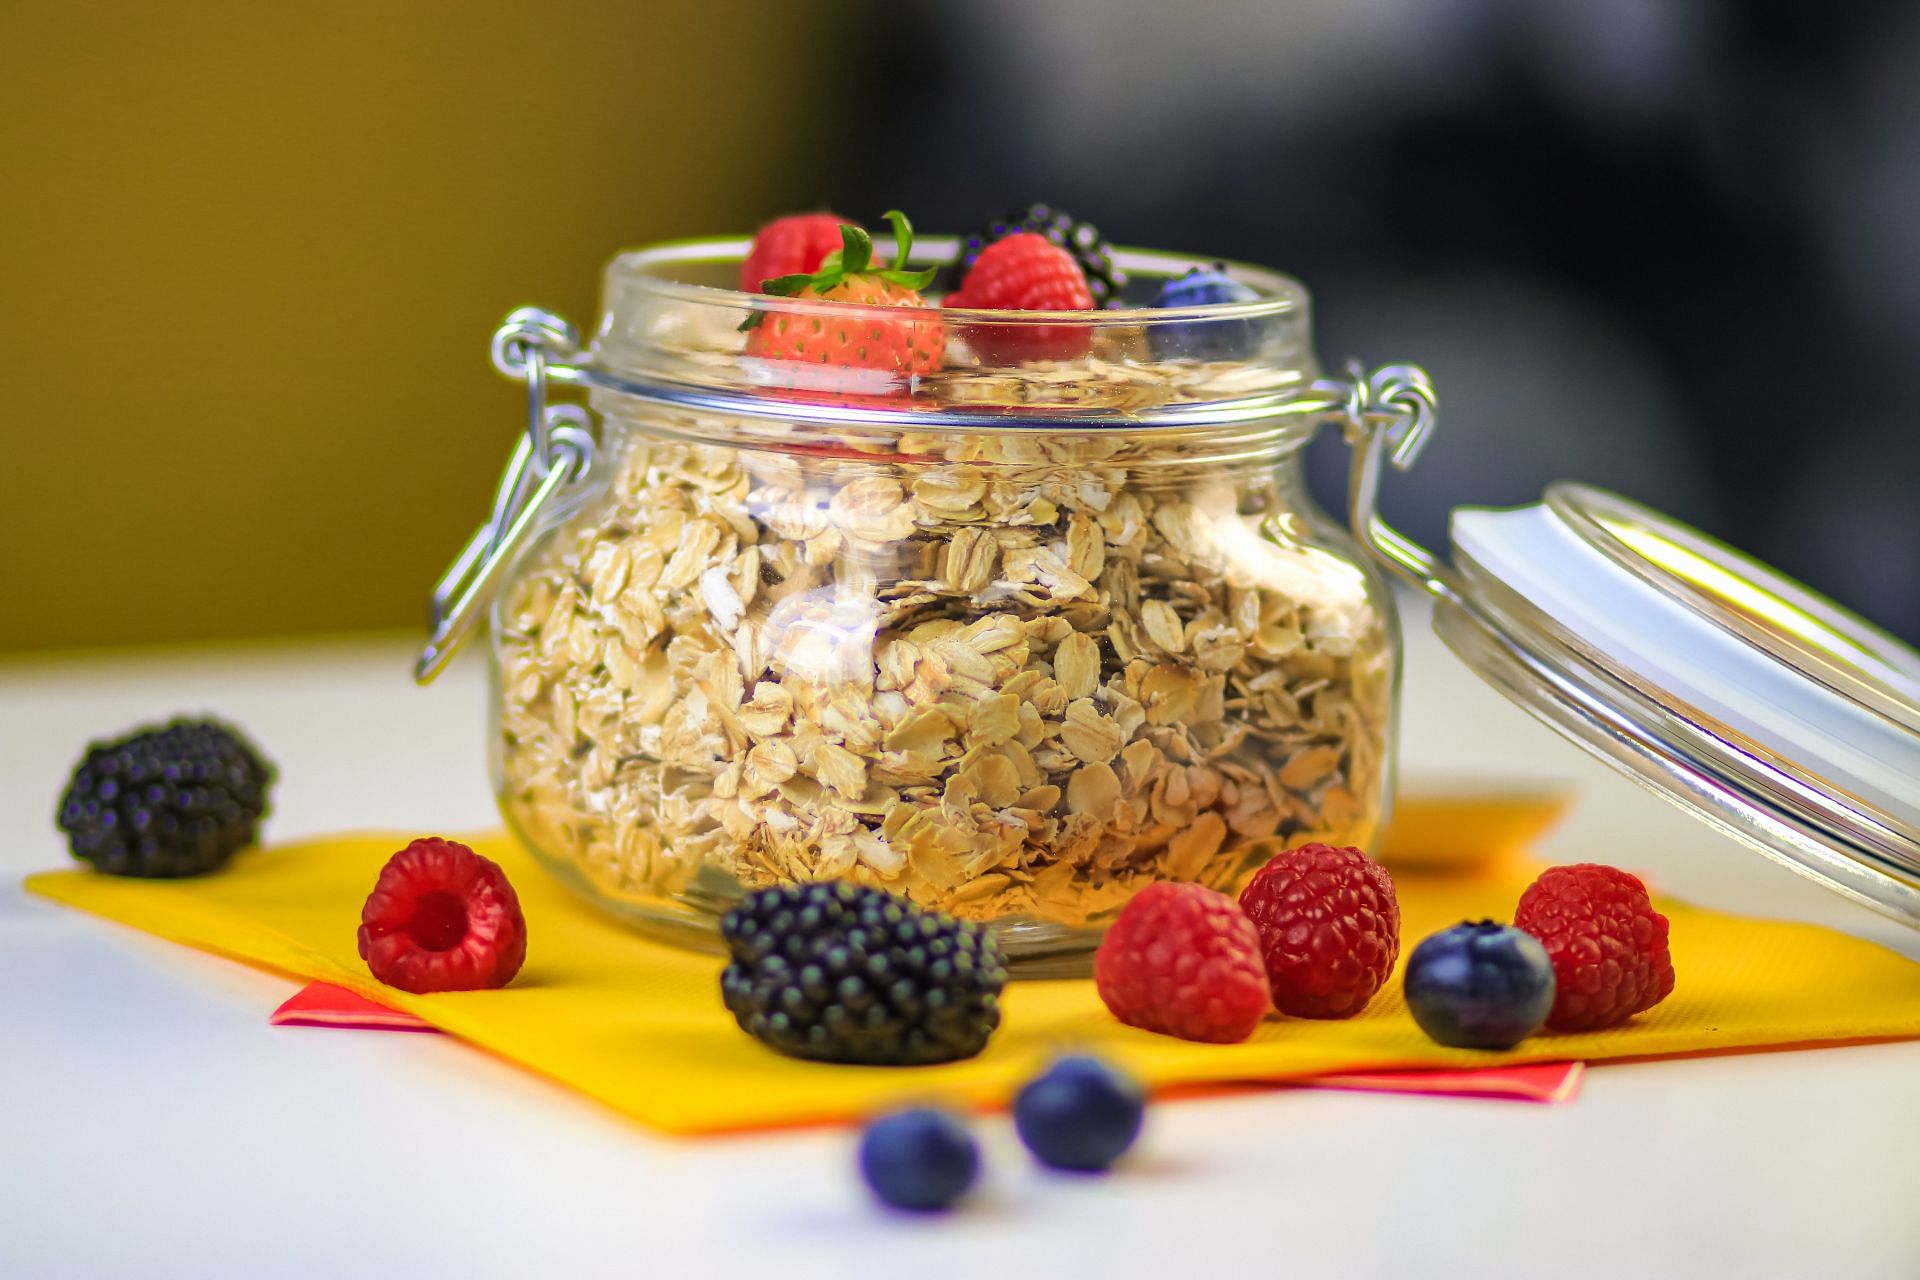 Overnight oats recipes that can help you with weight loss (Image via Unsplash/I Aboud)